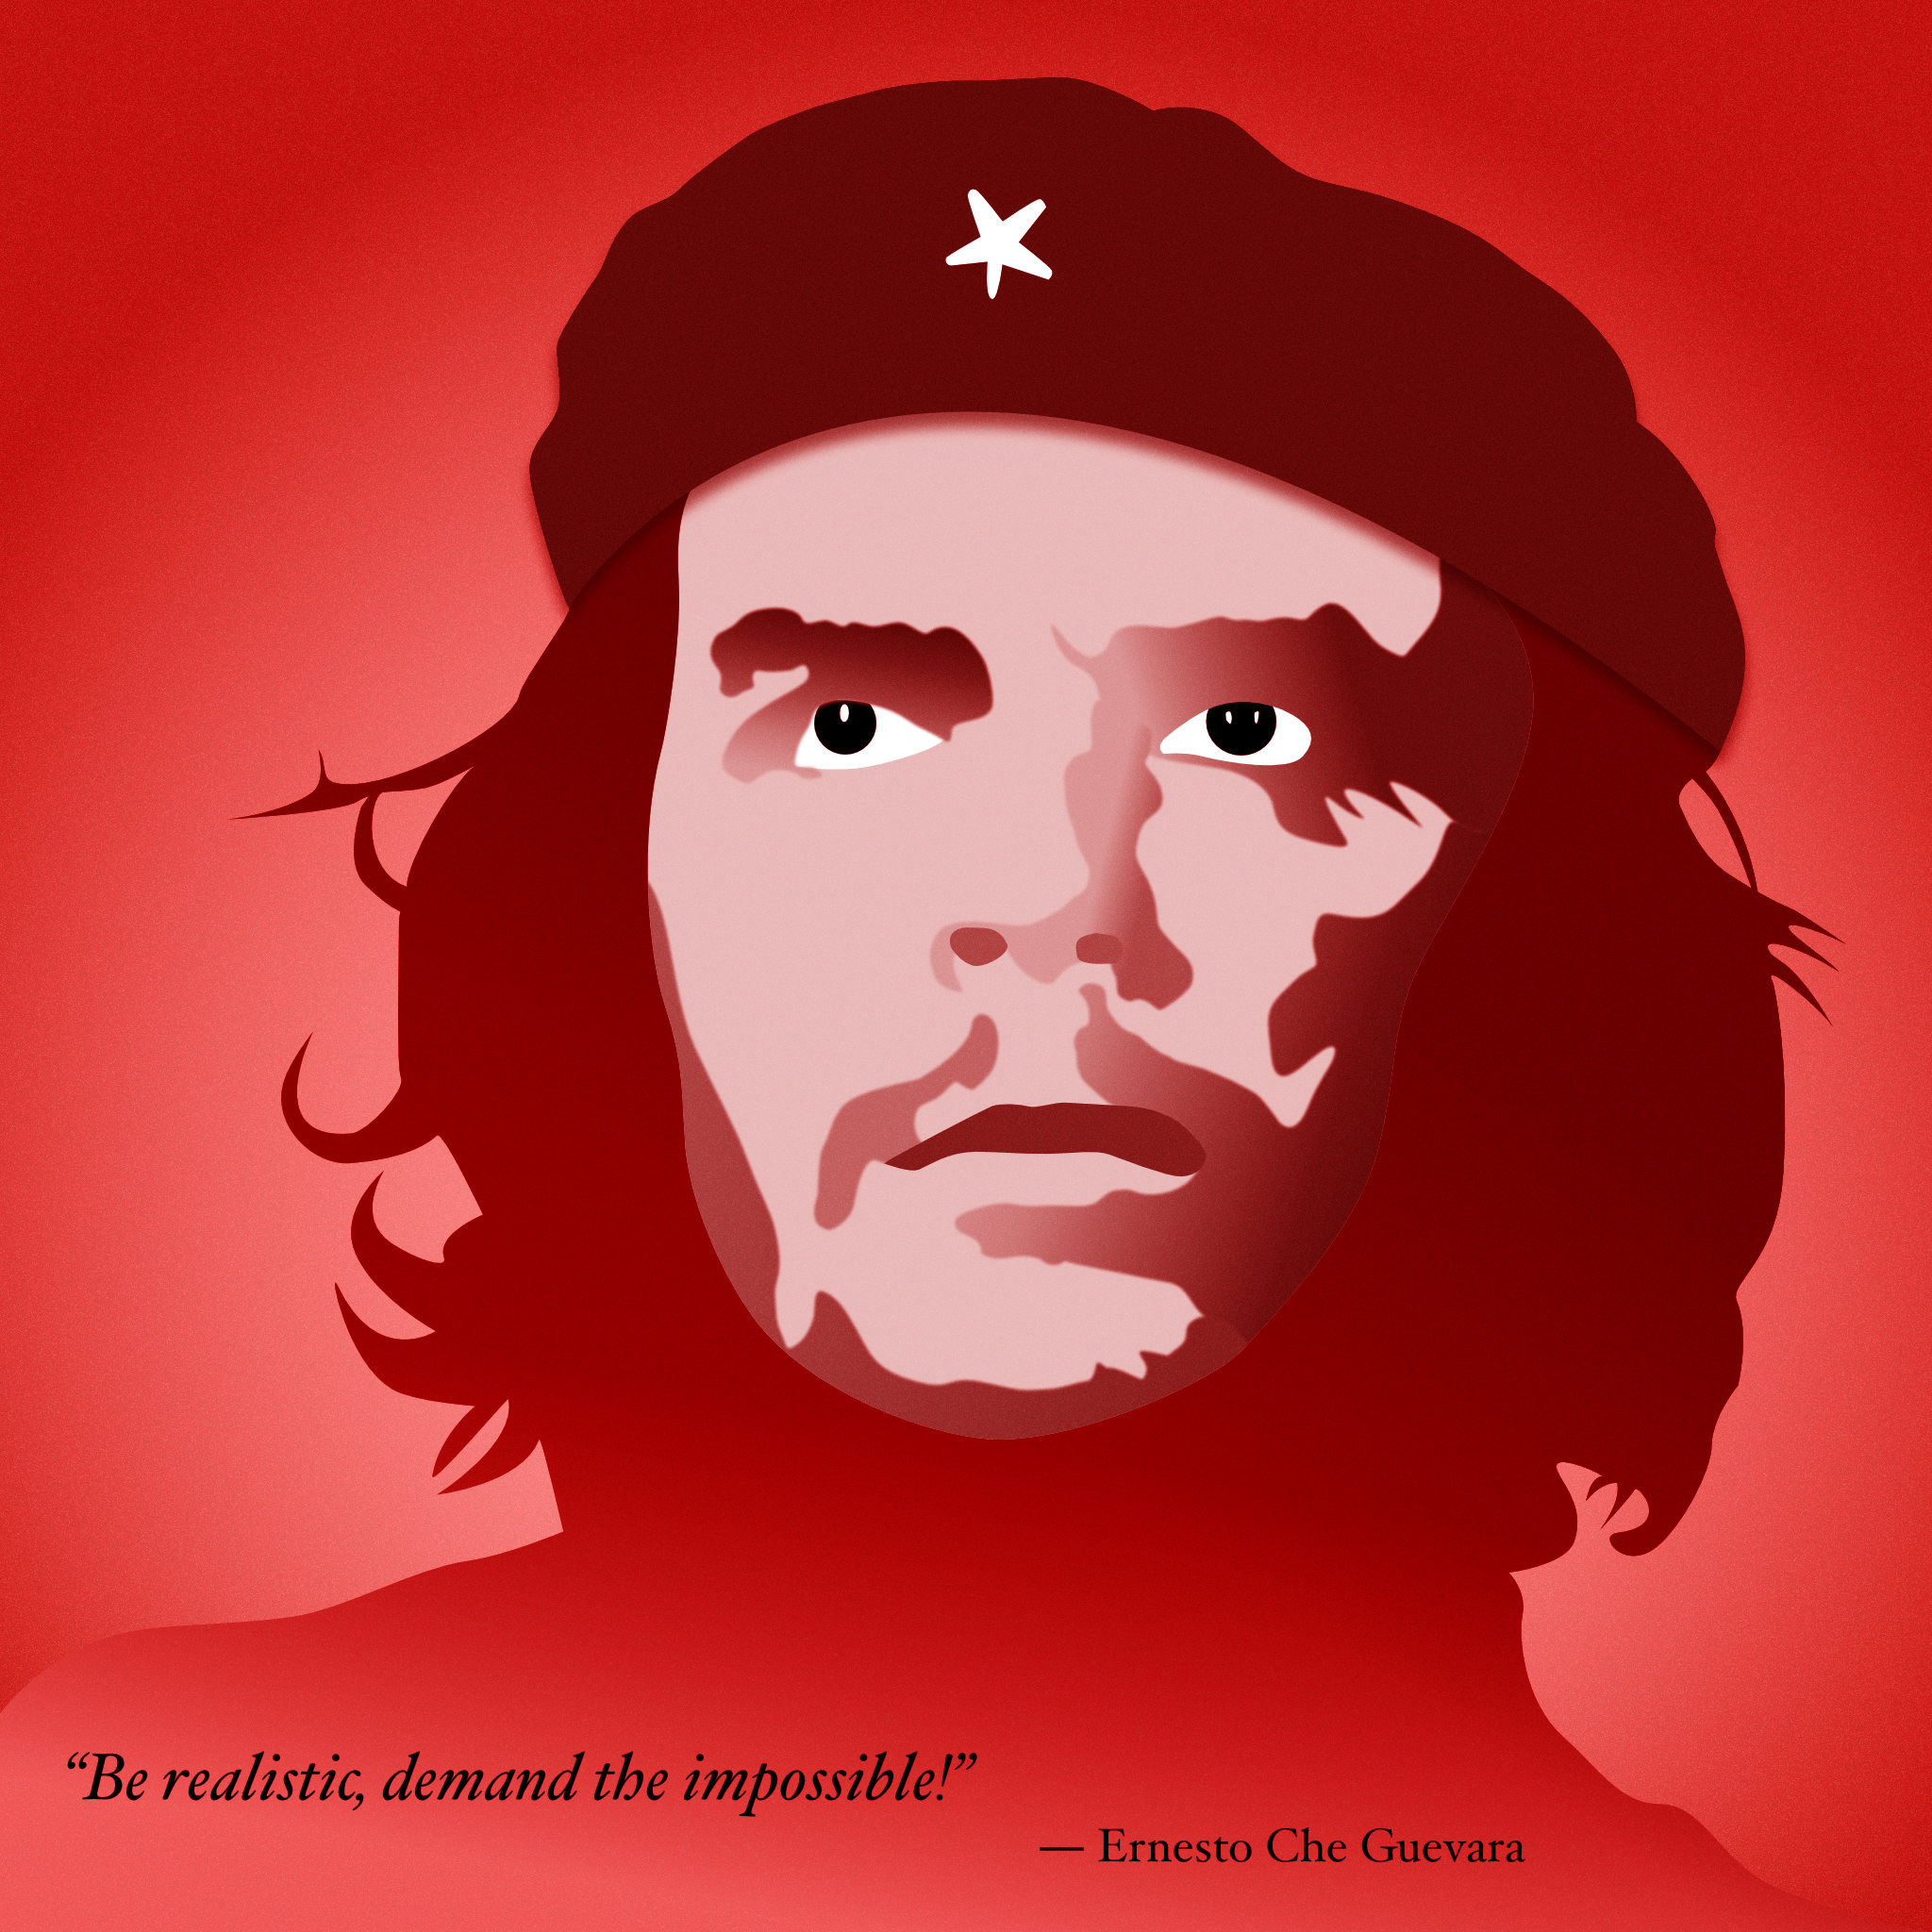 Vector portrait of Che Guevara, in red tones. Based on the iconic photo by Fidel A. Korda.